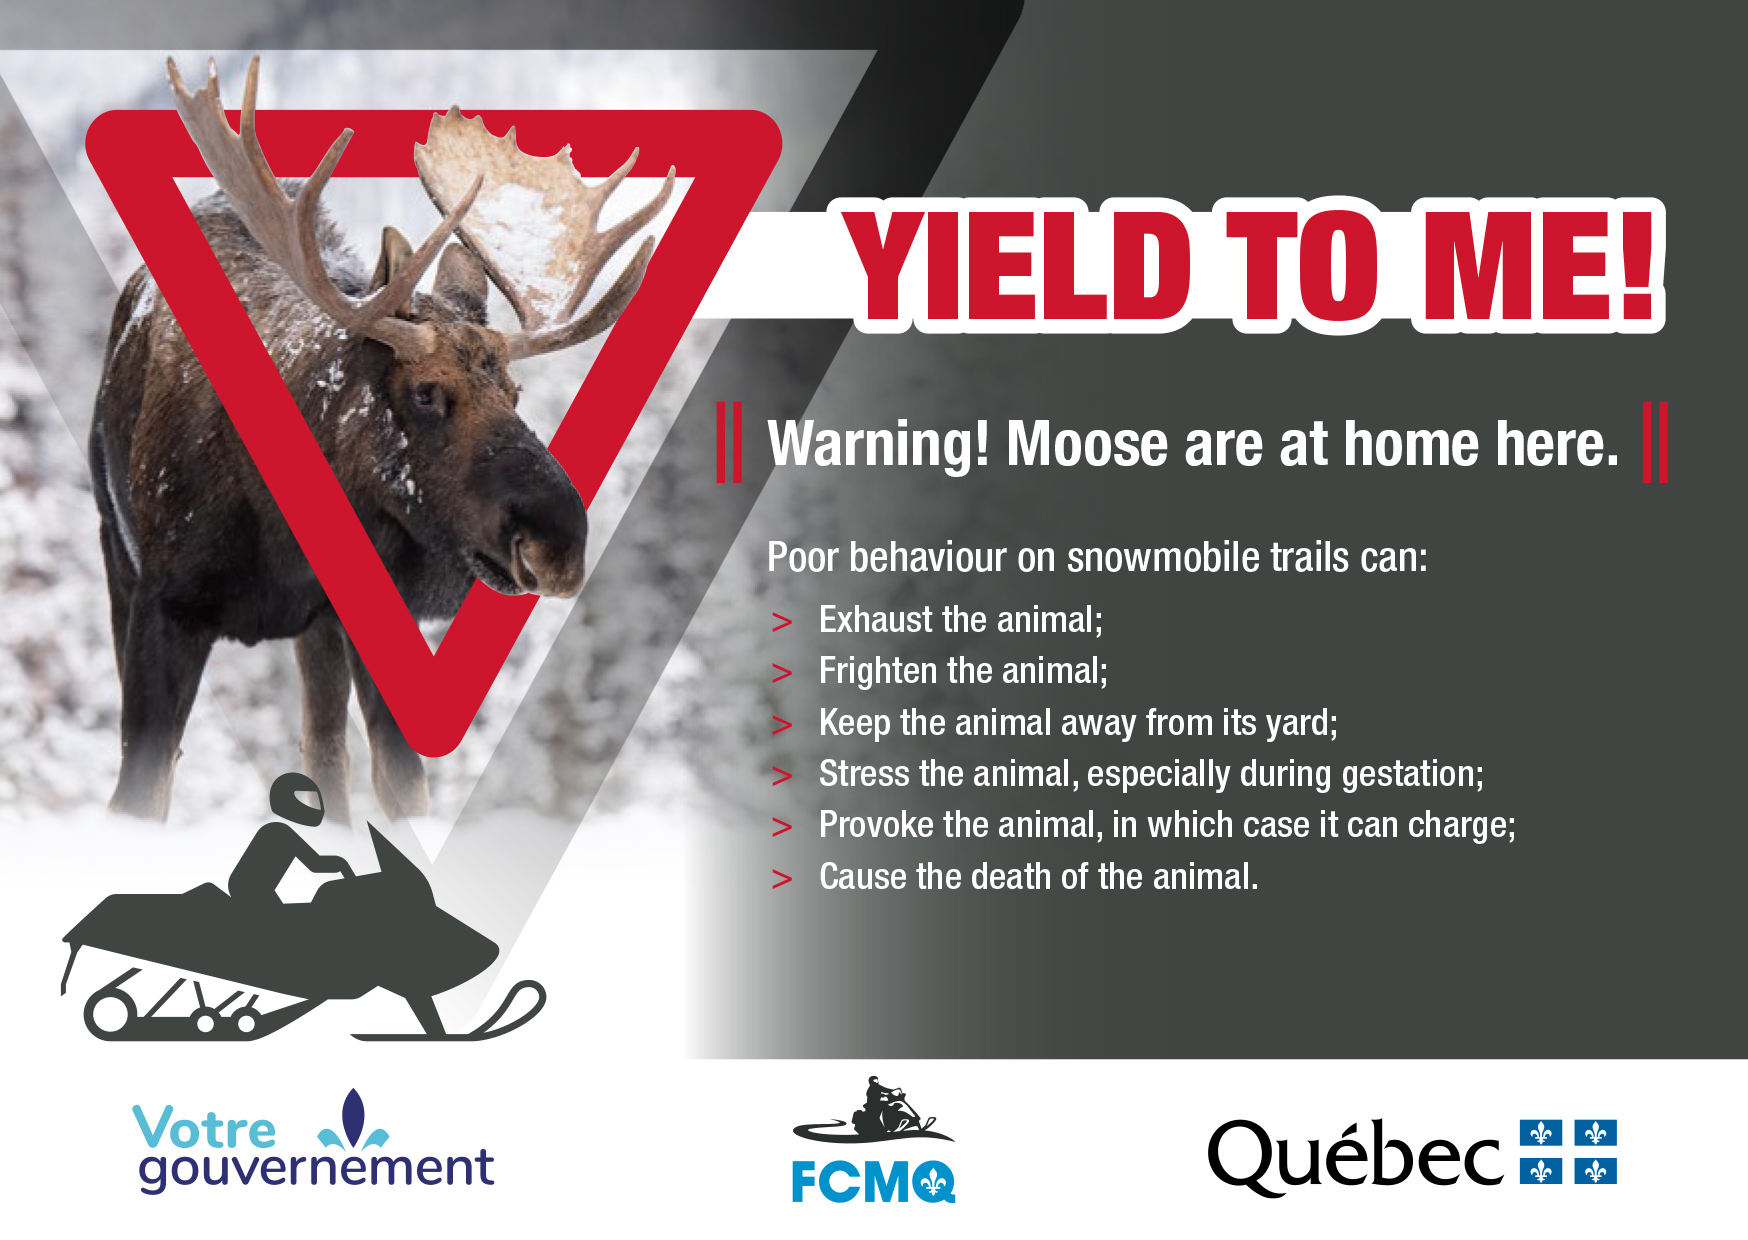 Coming across a moose when snowmobiling